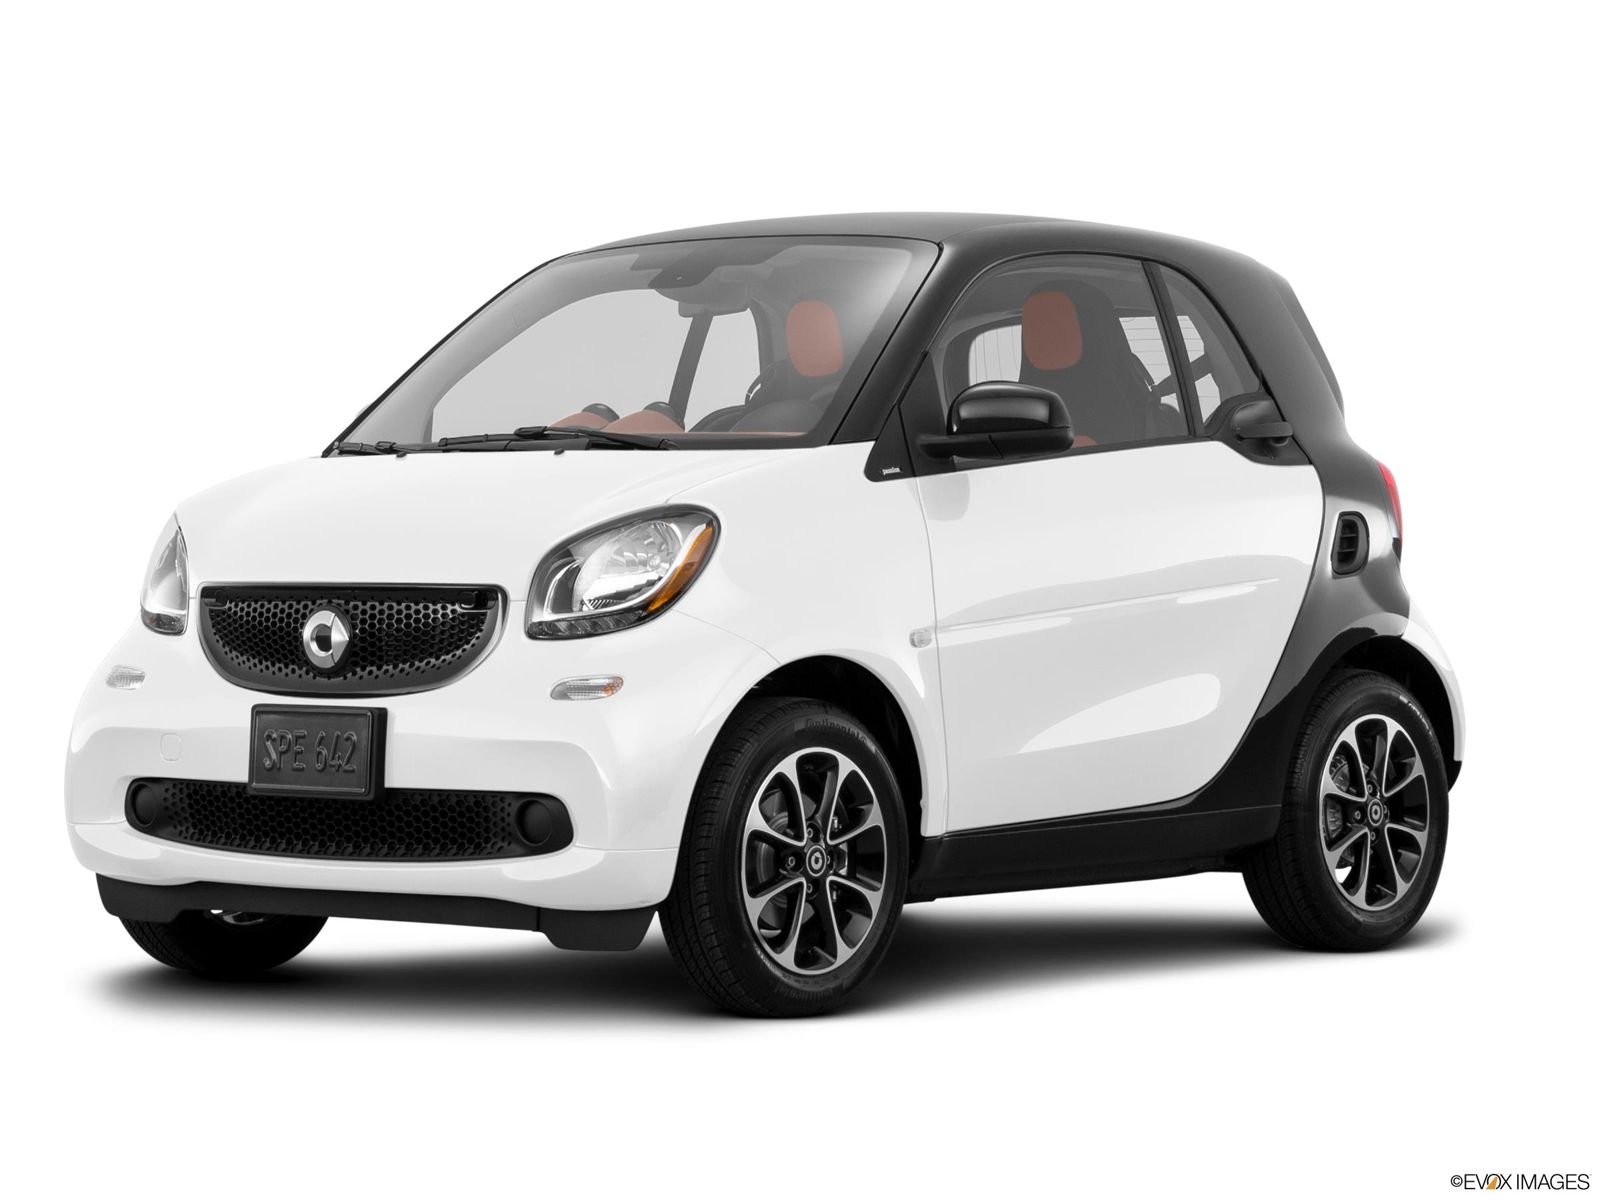 2016 Smart Fortwo Research, Photos, Specs and Expertise | CarMax